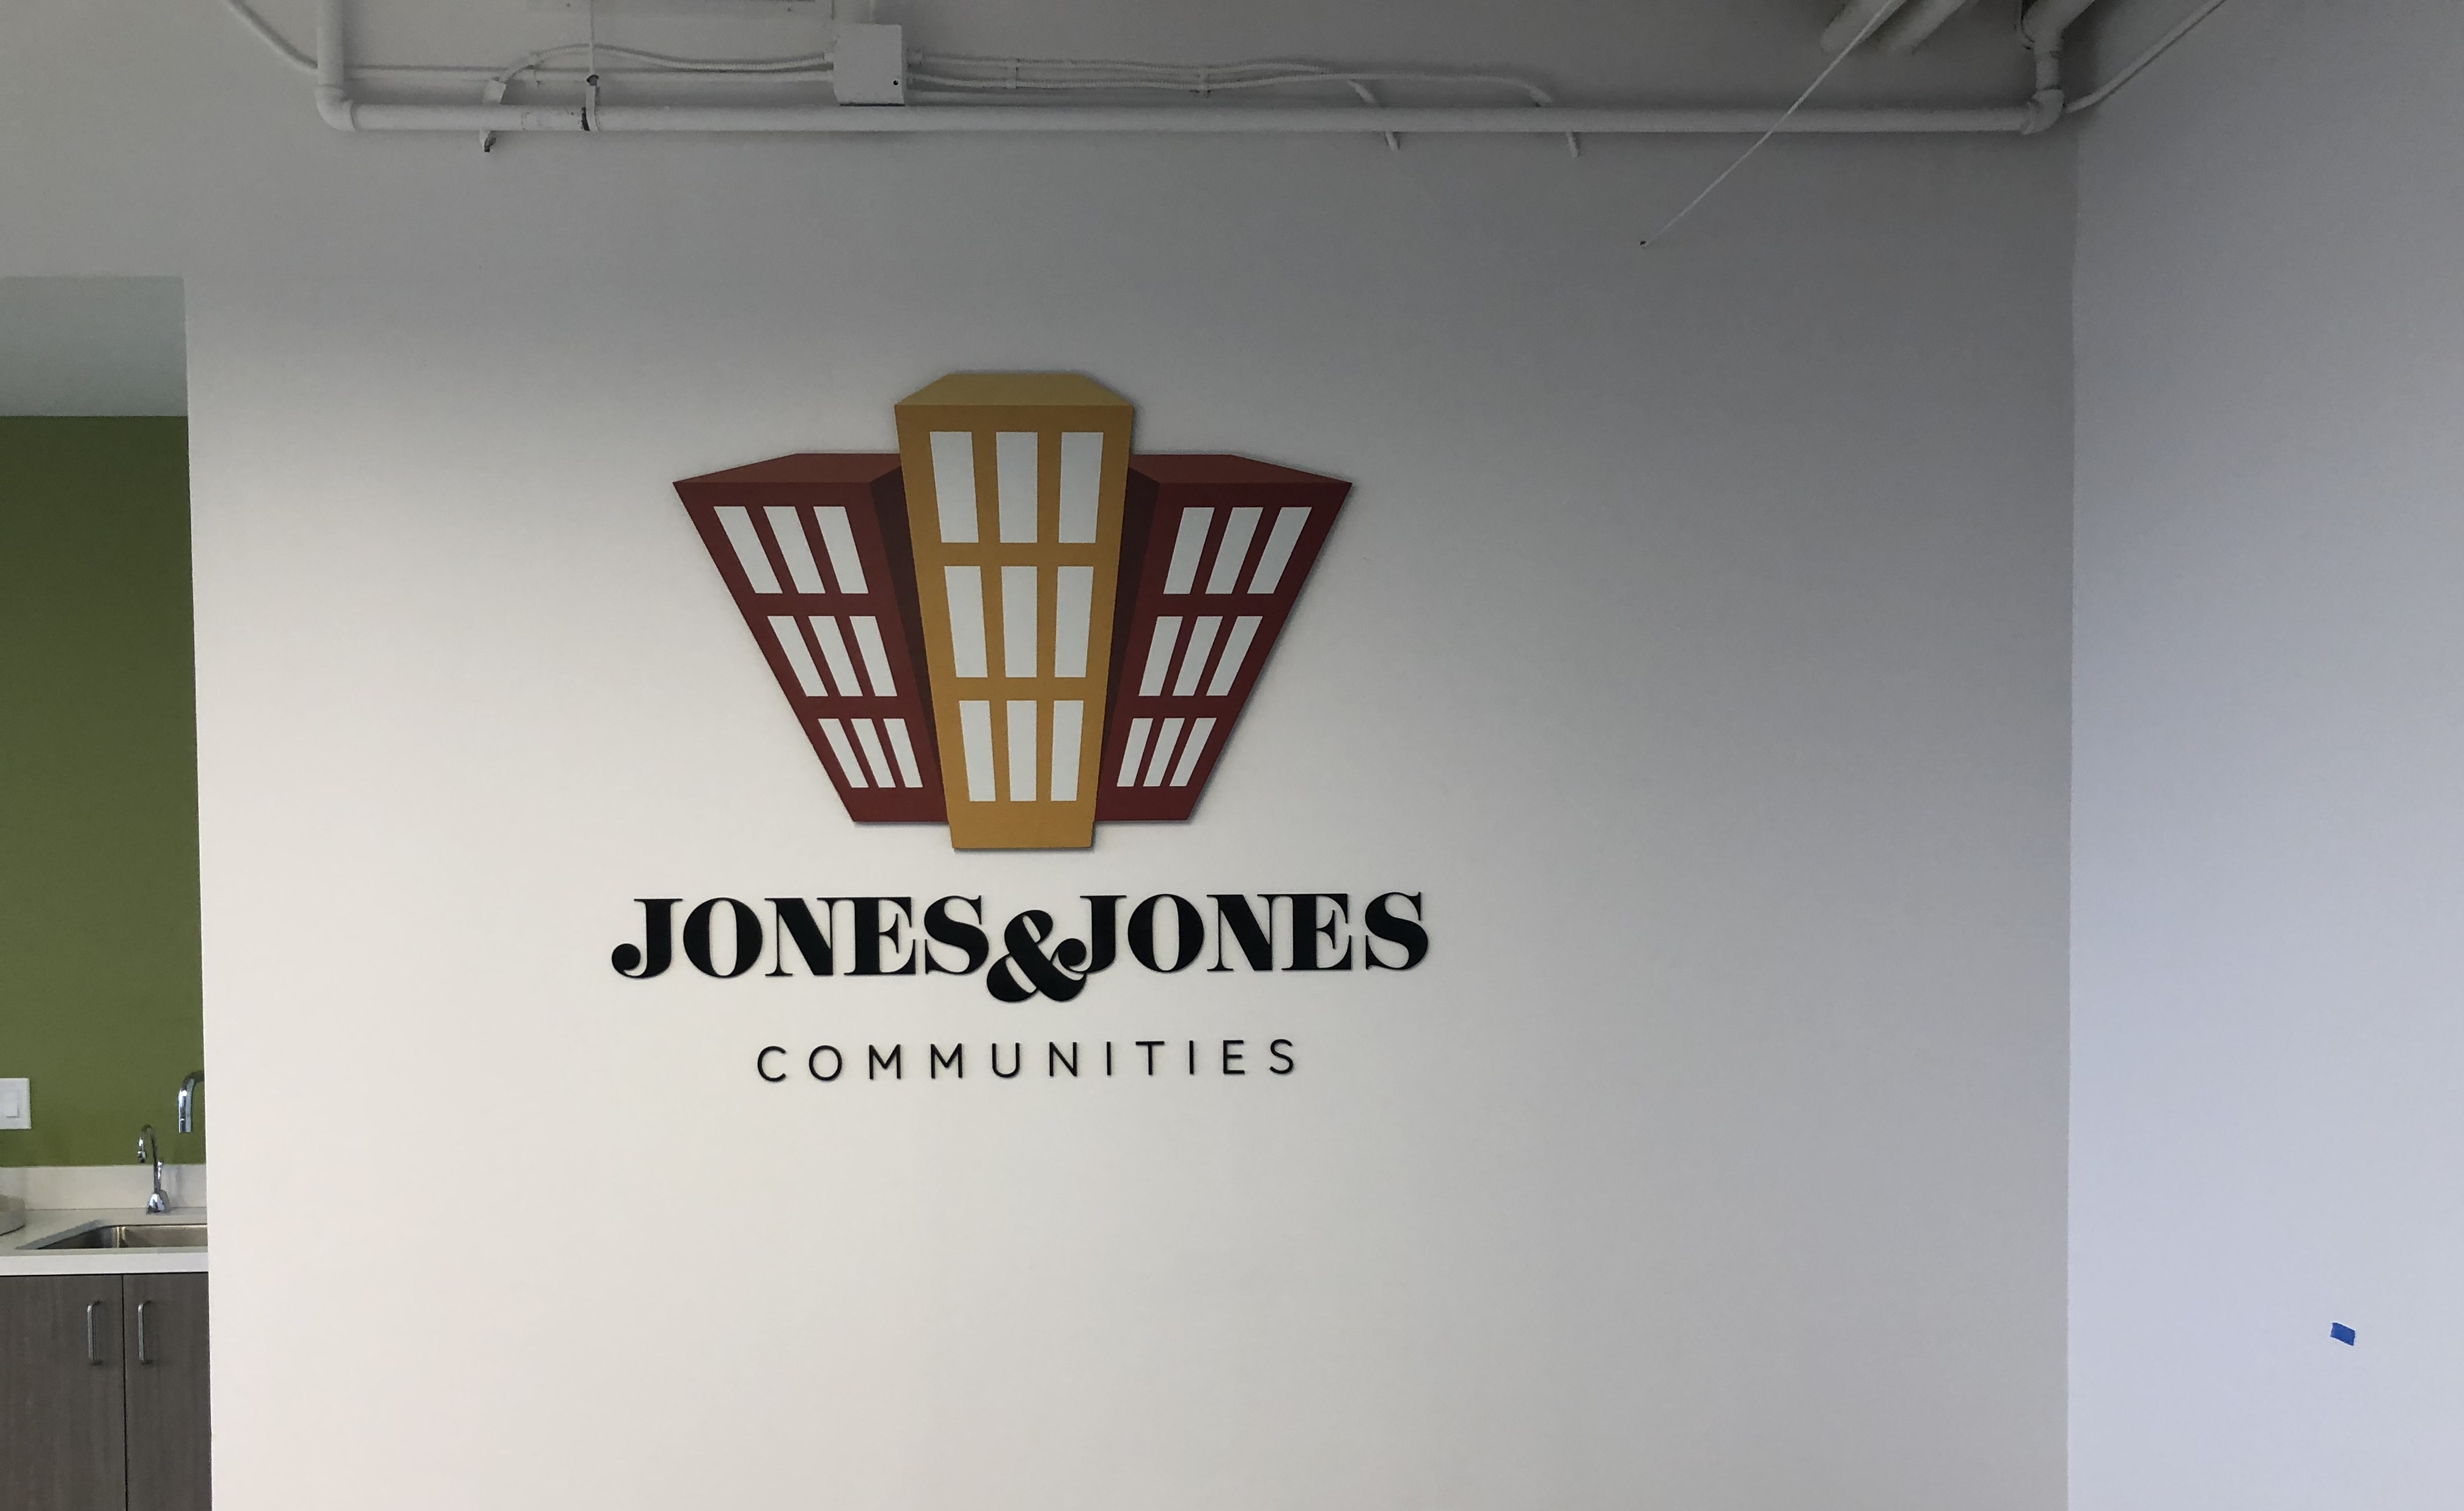 This is the acrylic conference room lobby sign we fabricated and installed in Jones and Jones' Malibu office conference room.